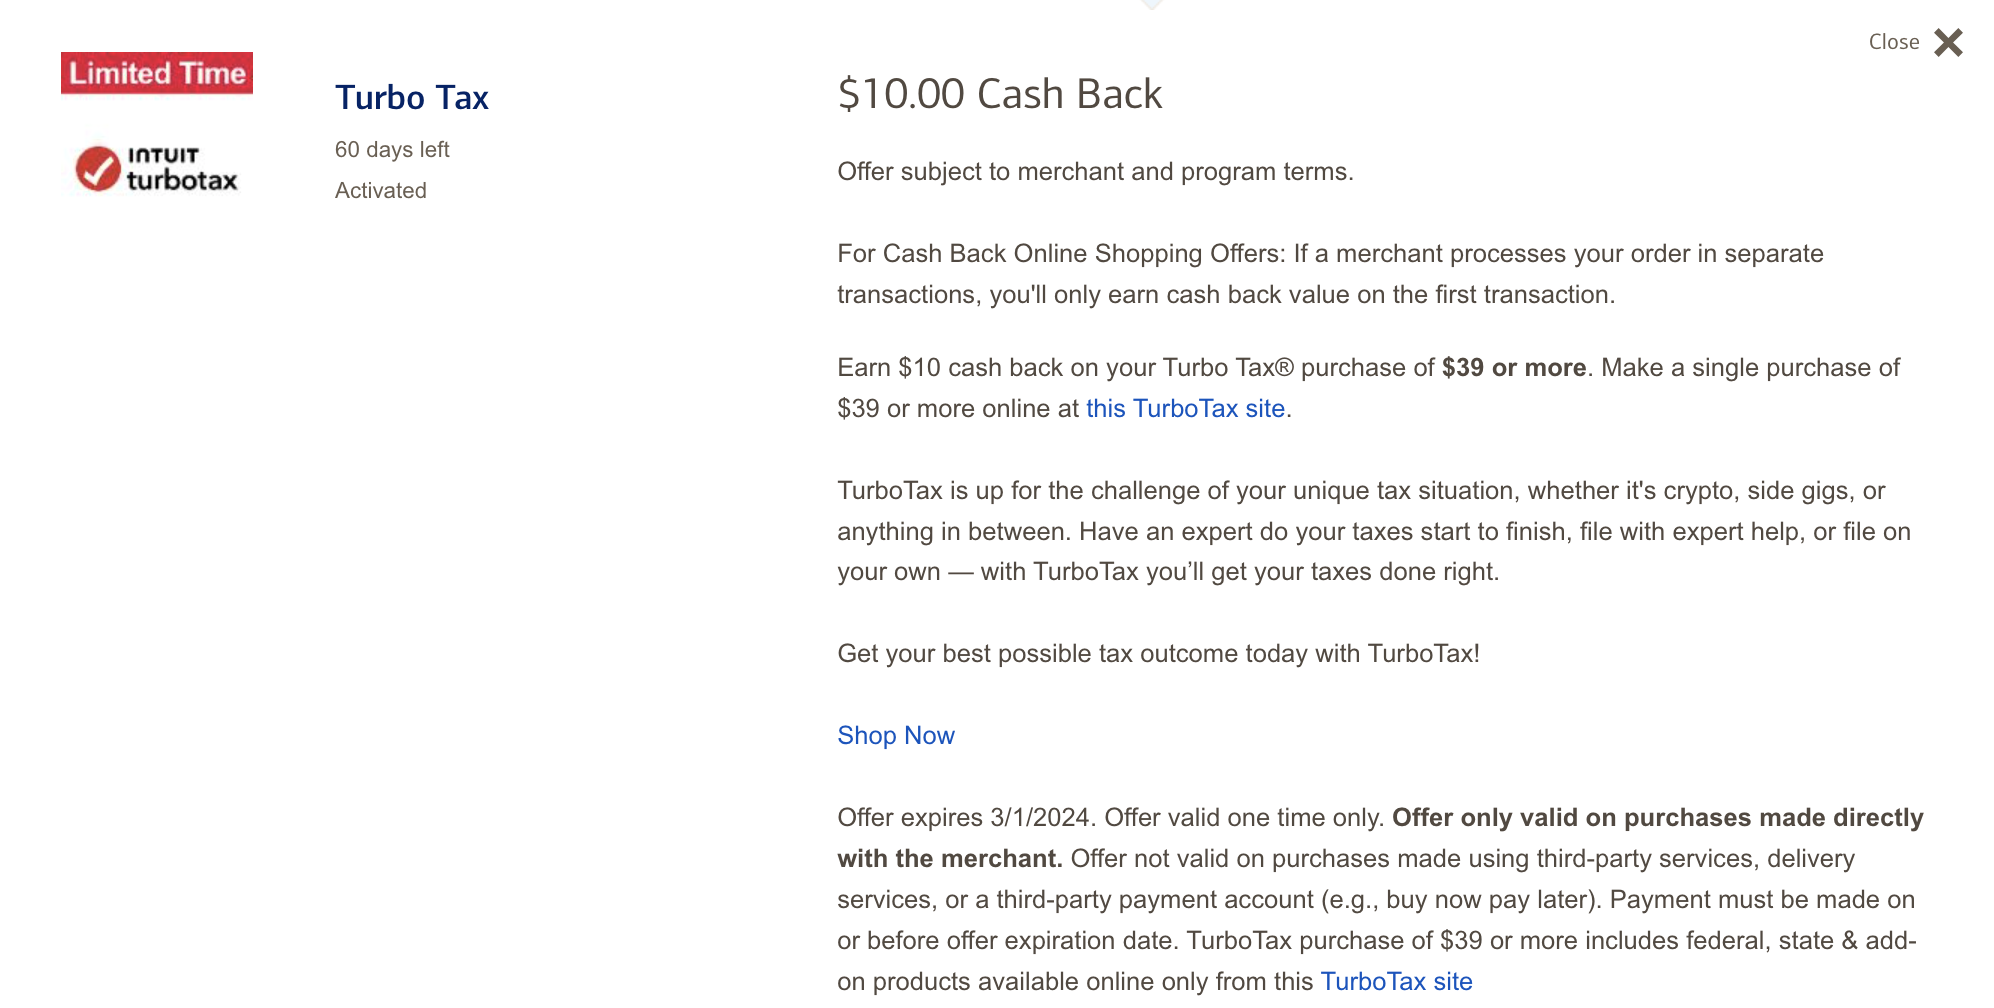 Chase Offers/BofA TurboTax, Get 10 Cashback With 39 Purchase